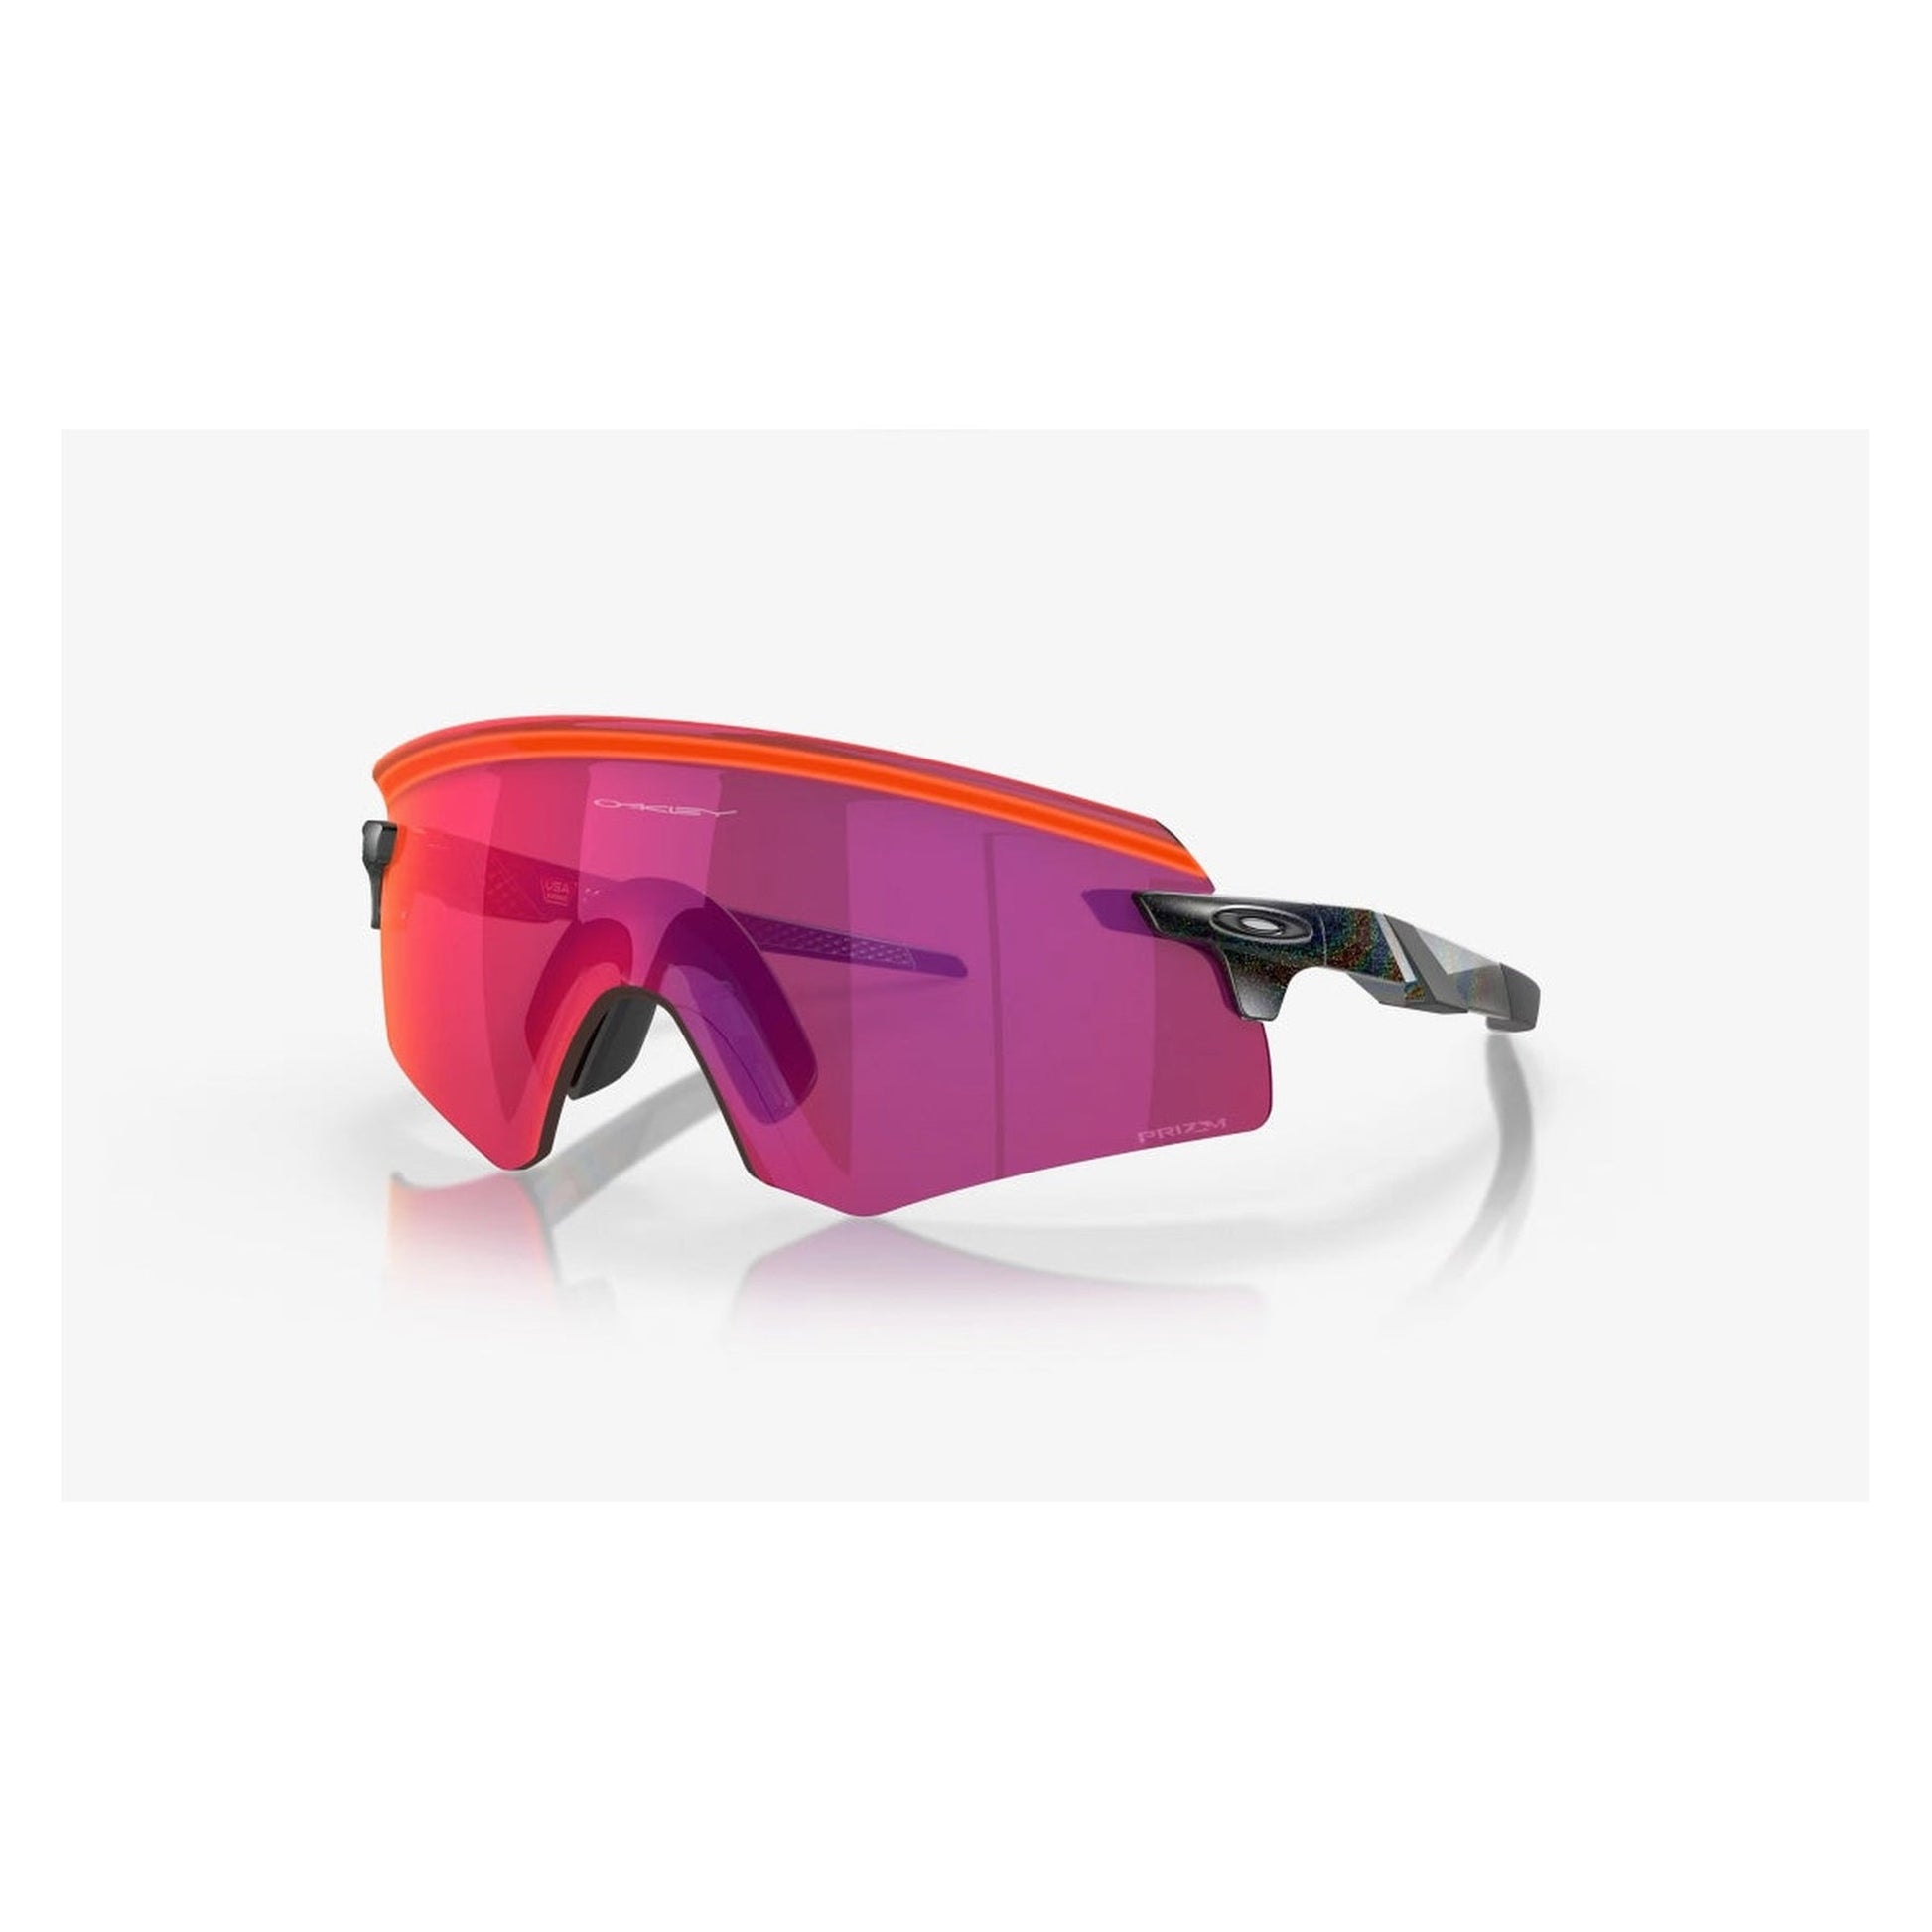 Oakley Encoder | completecyclist - Purpose-built for use across multiple sport categories, Encoder is a sport performance style designed with hat and helmet fit functionality in mind. The